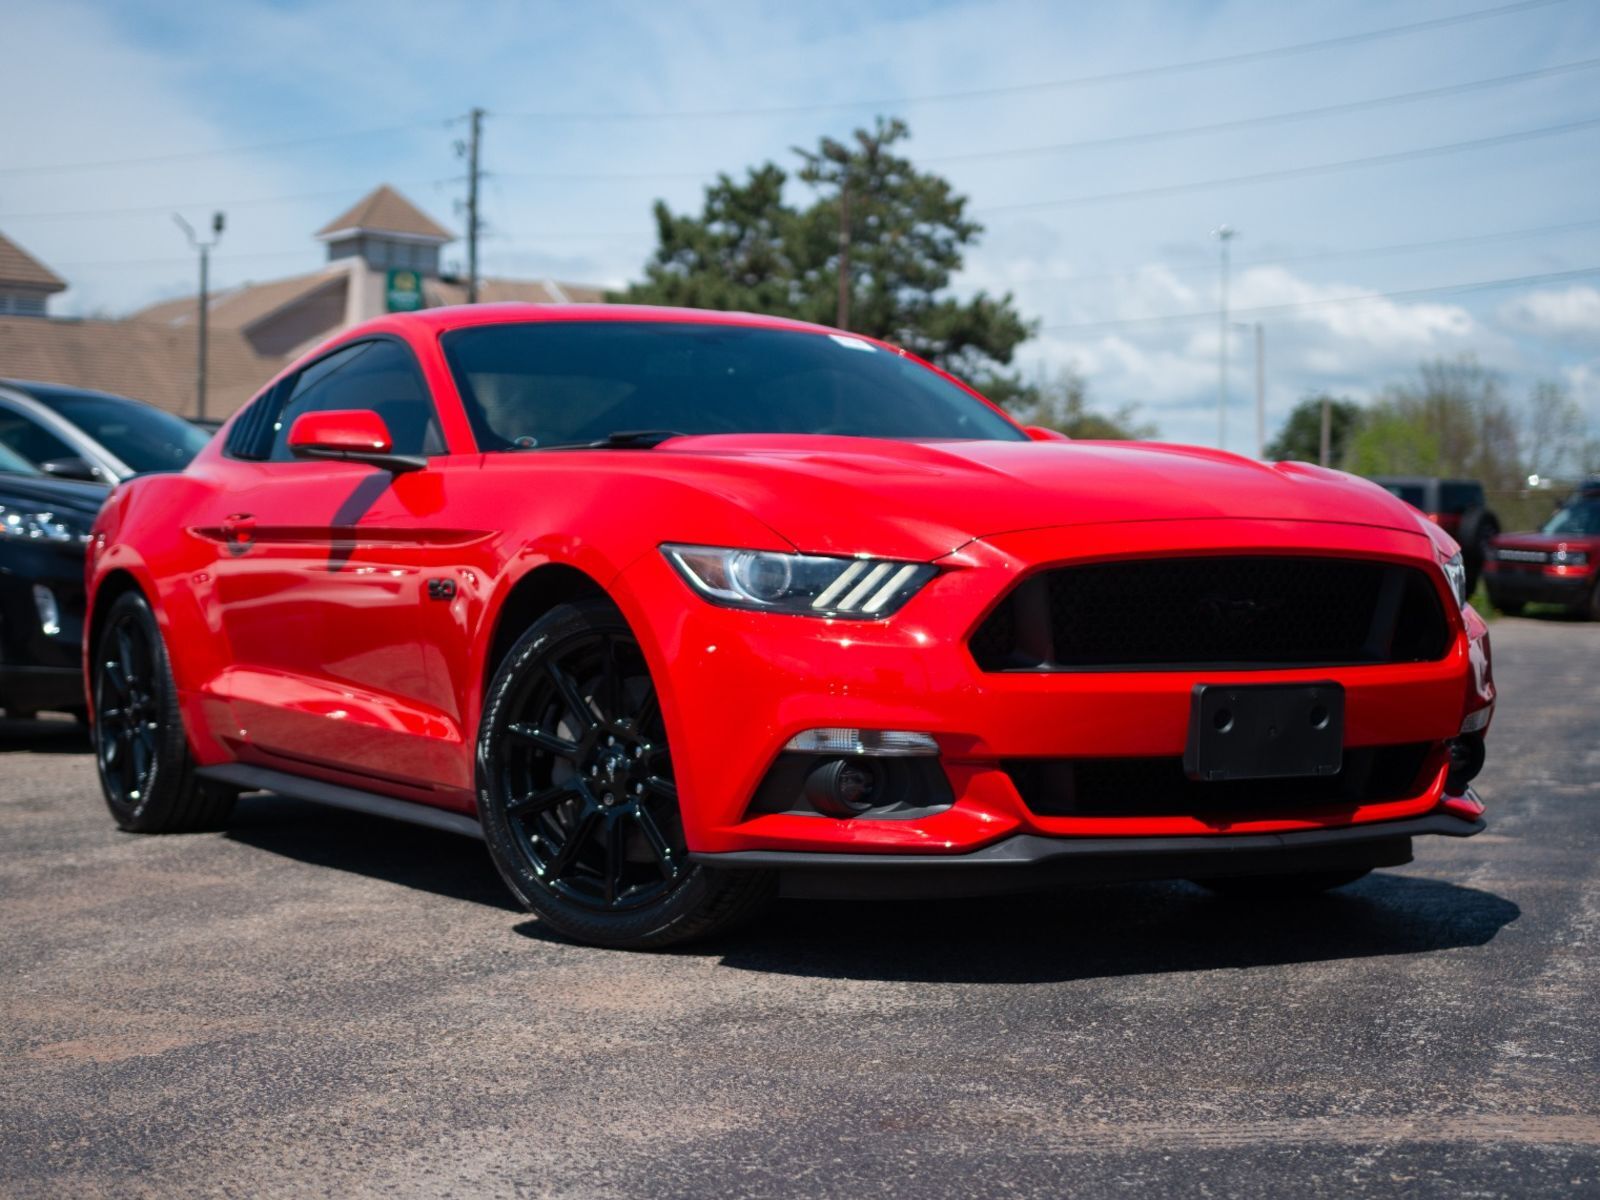 2016 Ford Mustang GT 2 DOOR COUPE, 5.0L V8